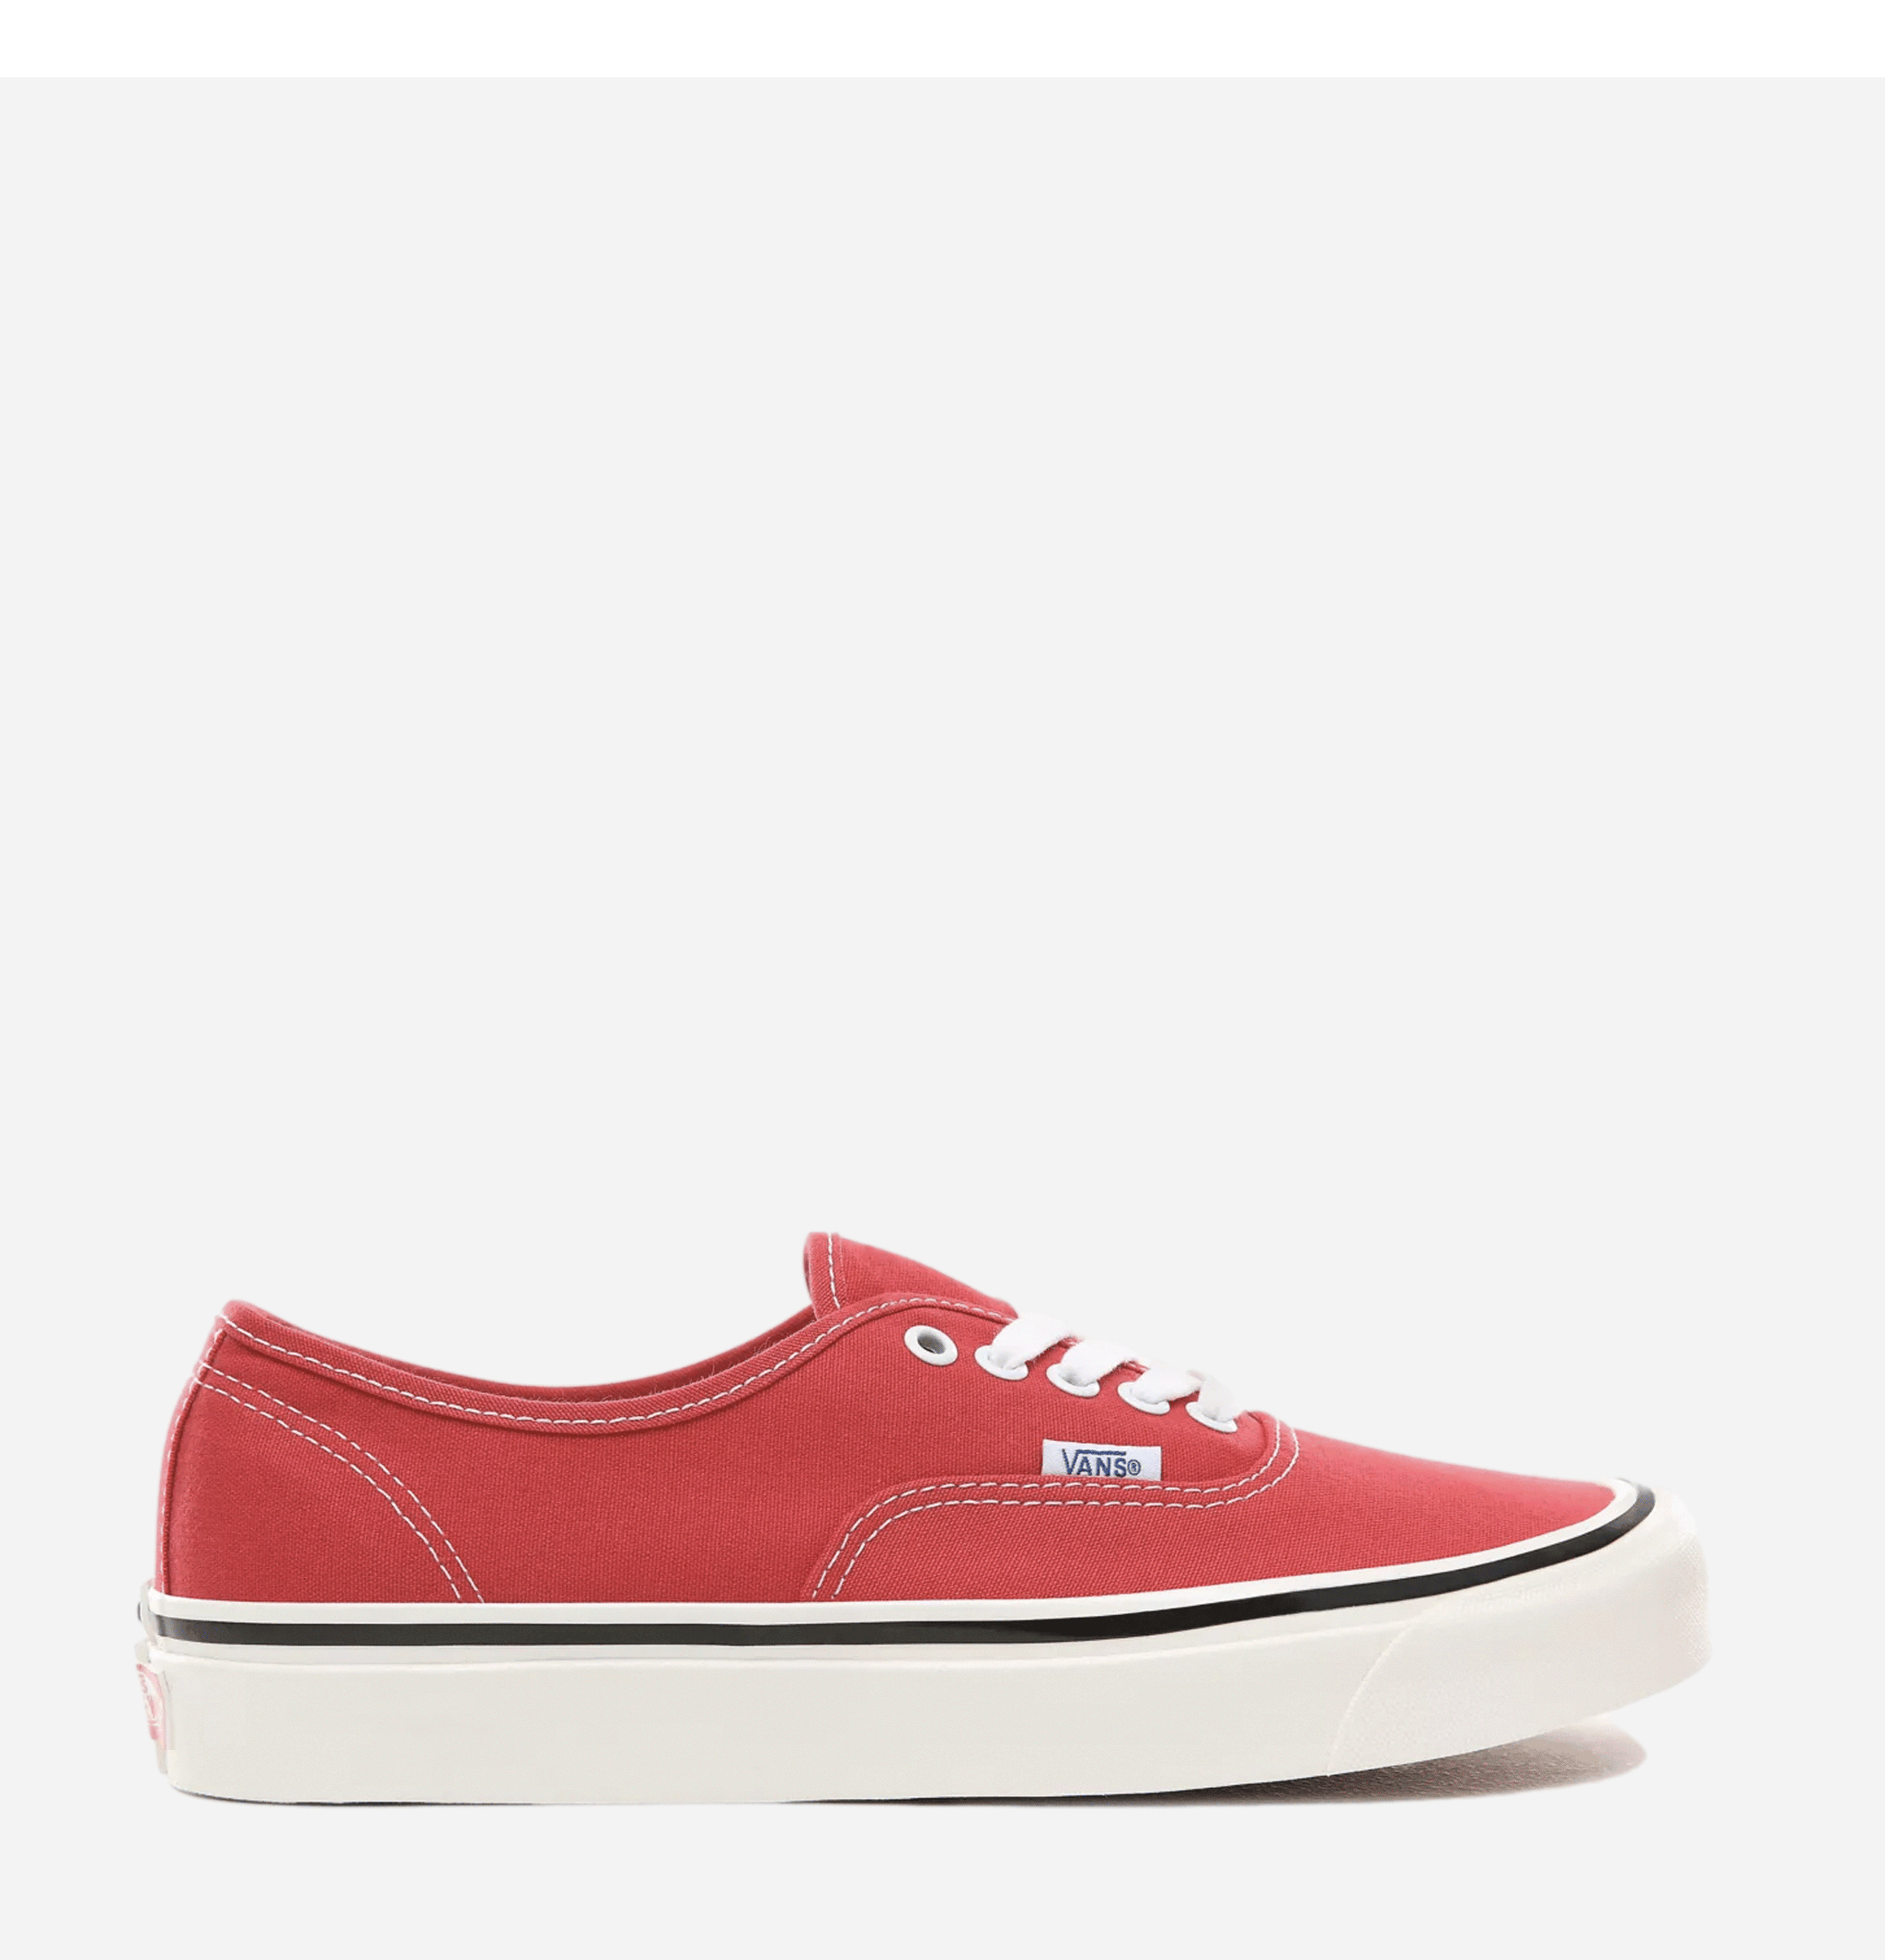 Authentic Anaheim Red